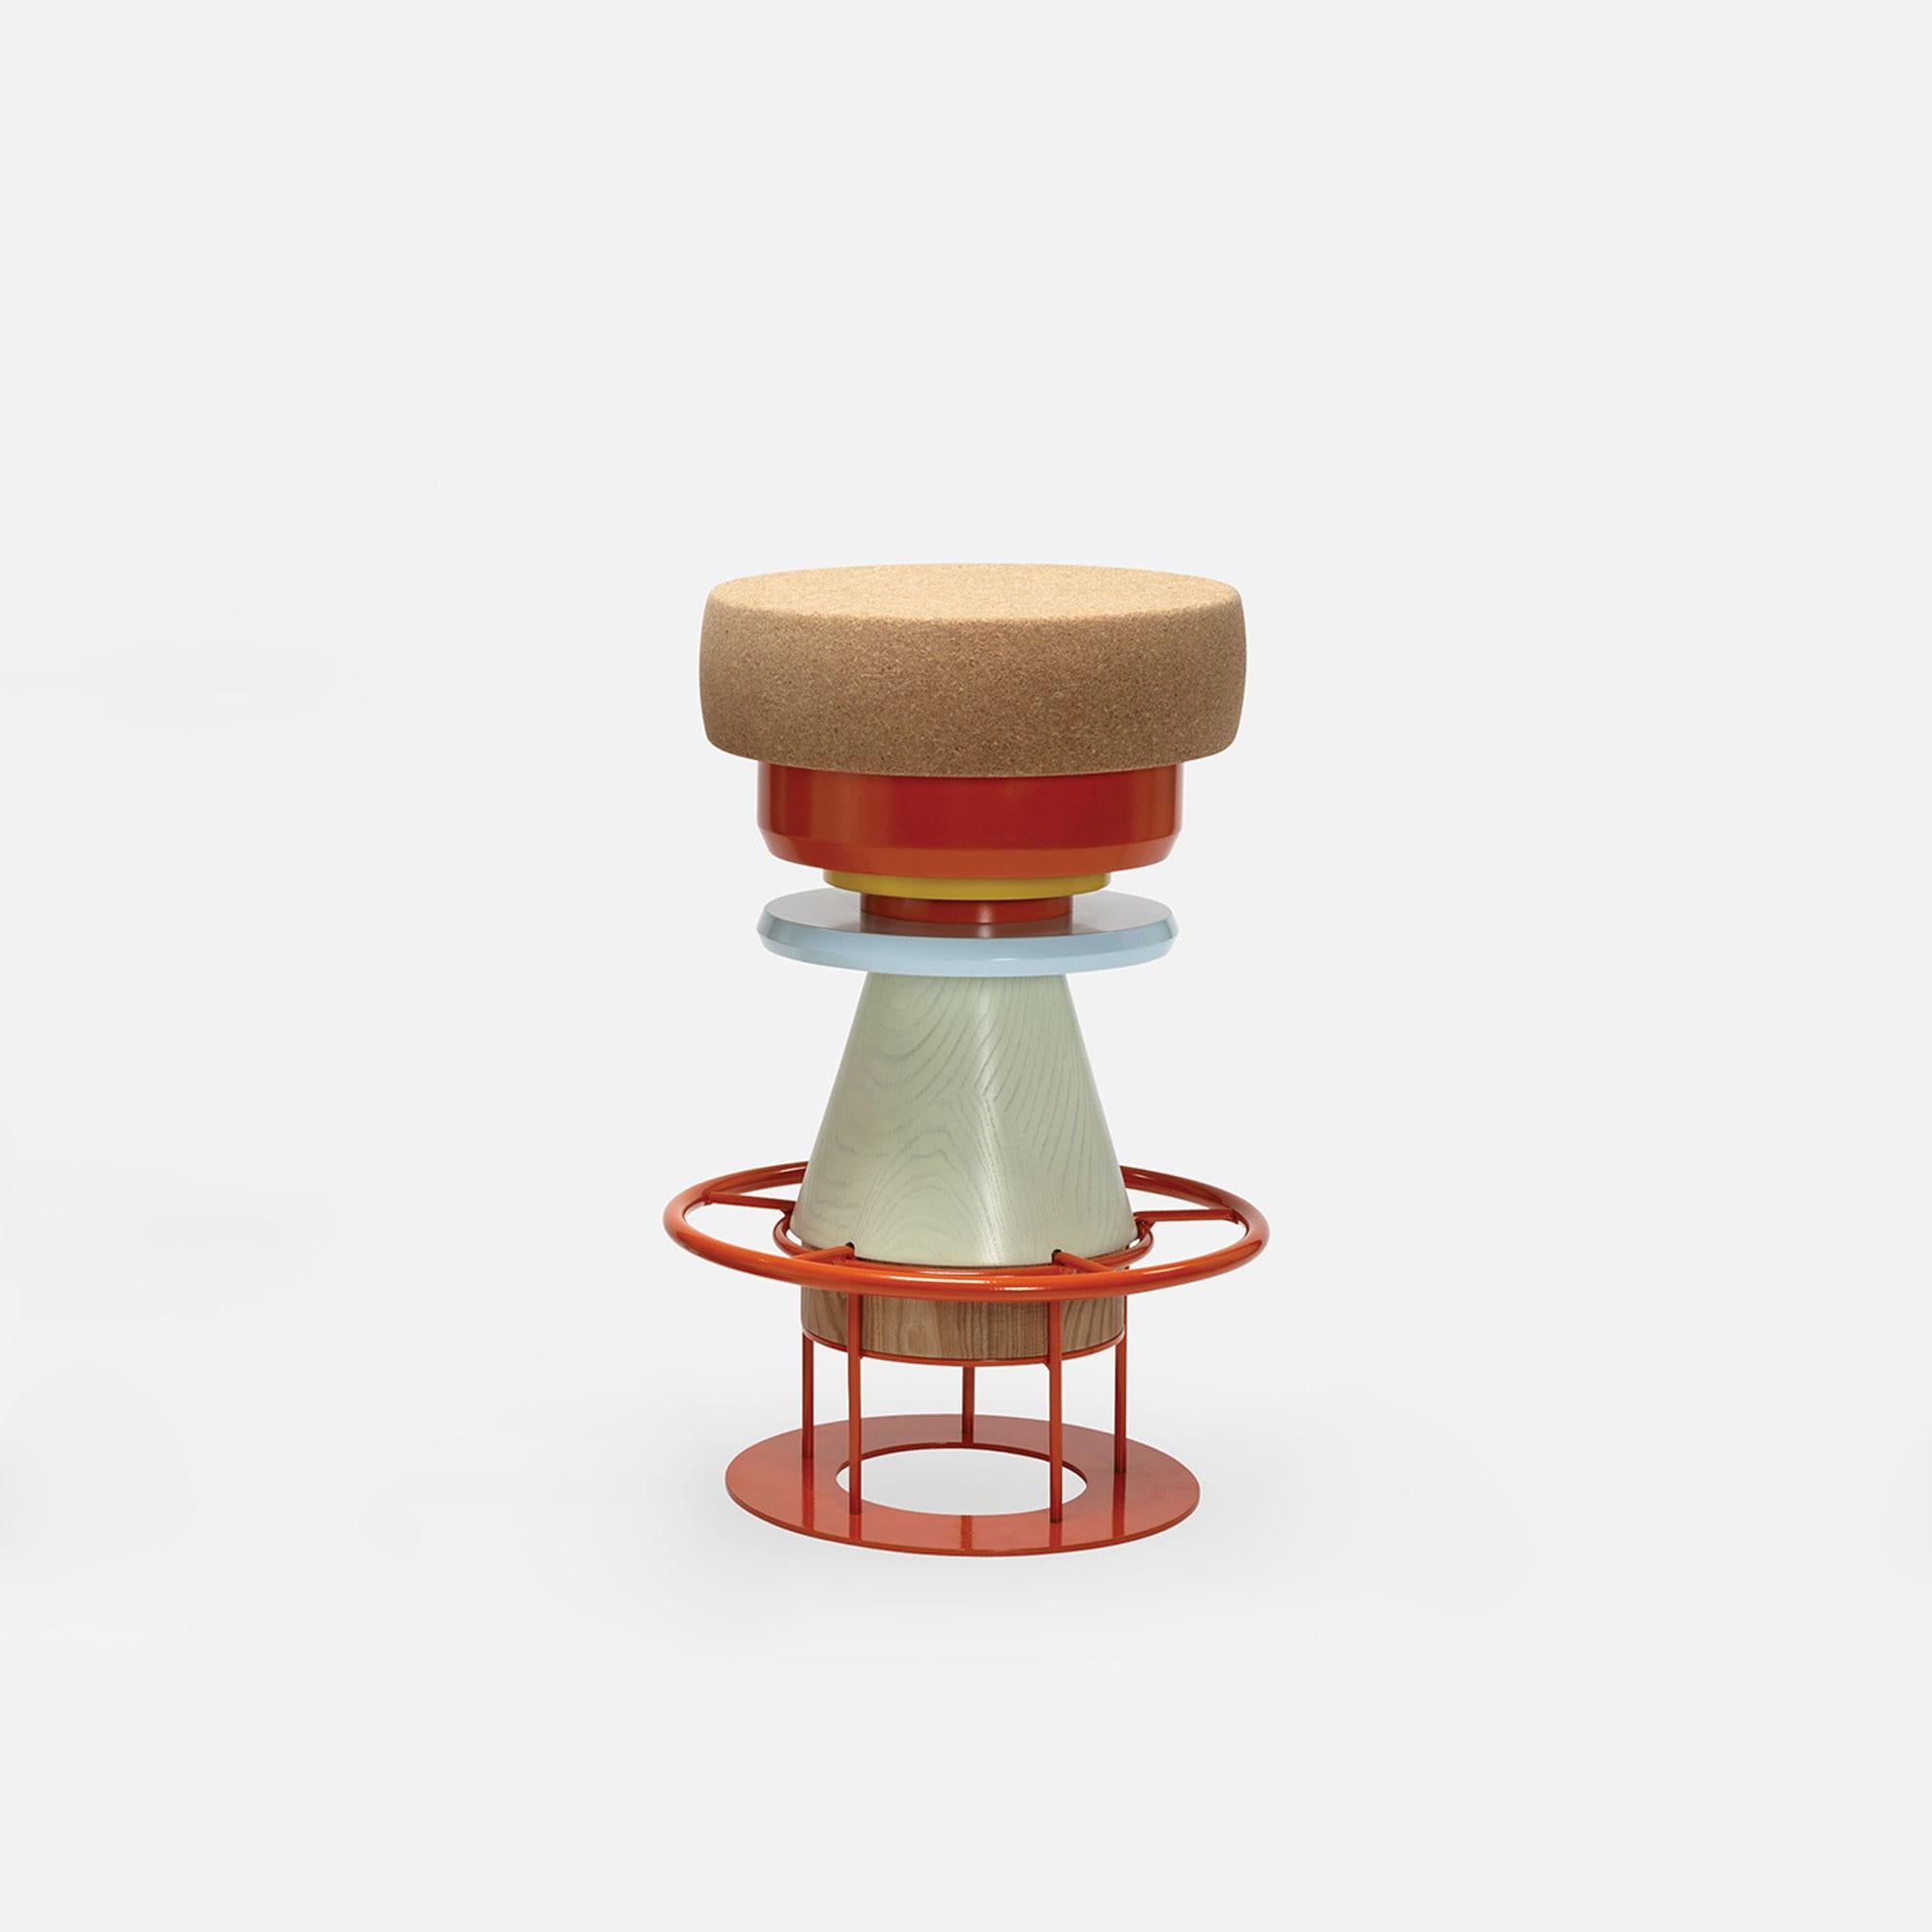 Set of 2 medium colorful tembo stool - Note Design Studio
Dimensions: D 36 x H 64 cm.
Materials: Lacquered steel structure, solid wood (beech) and lacquered MDF, natural cork base.
Available in black and 3 sizes: H46, H64, H76 cm.

Tembo is a